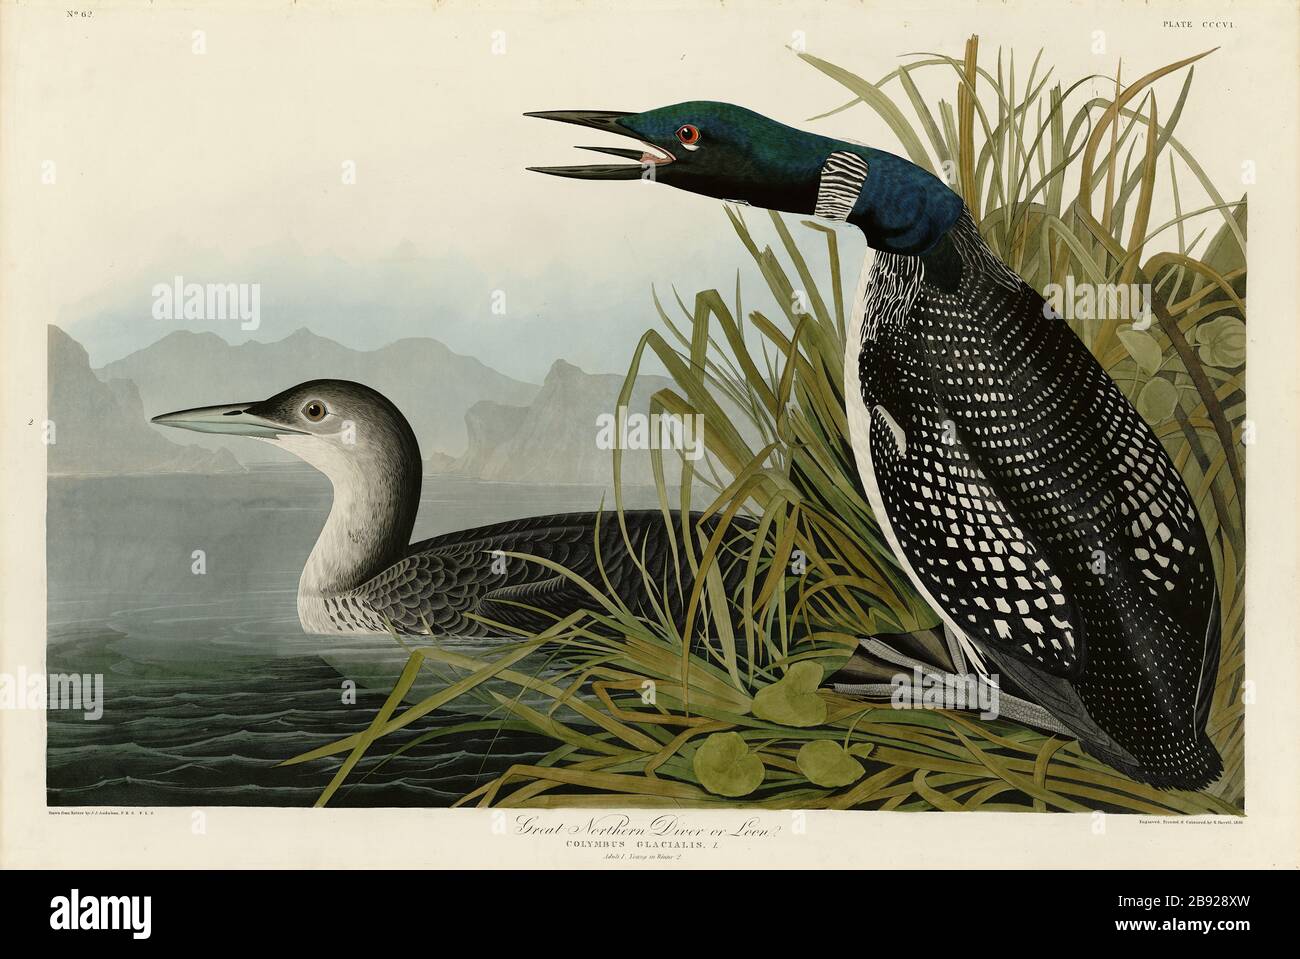 Plate 306 Great Northern Diver or Loon, The Birds of America folio (1827–1839) by John James Audubon - Very high resolution and quality edited image Stock Photo